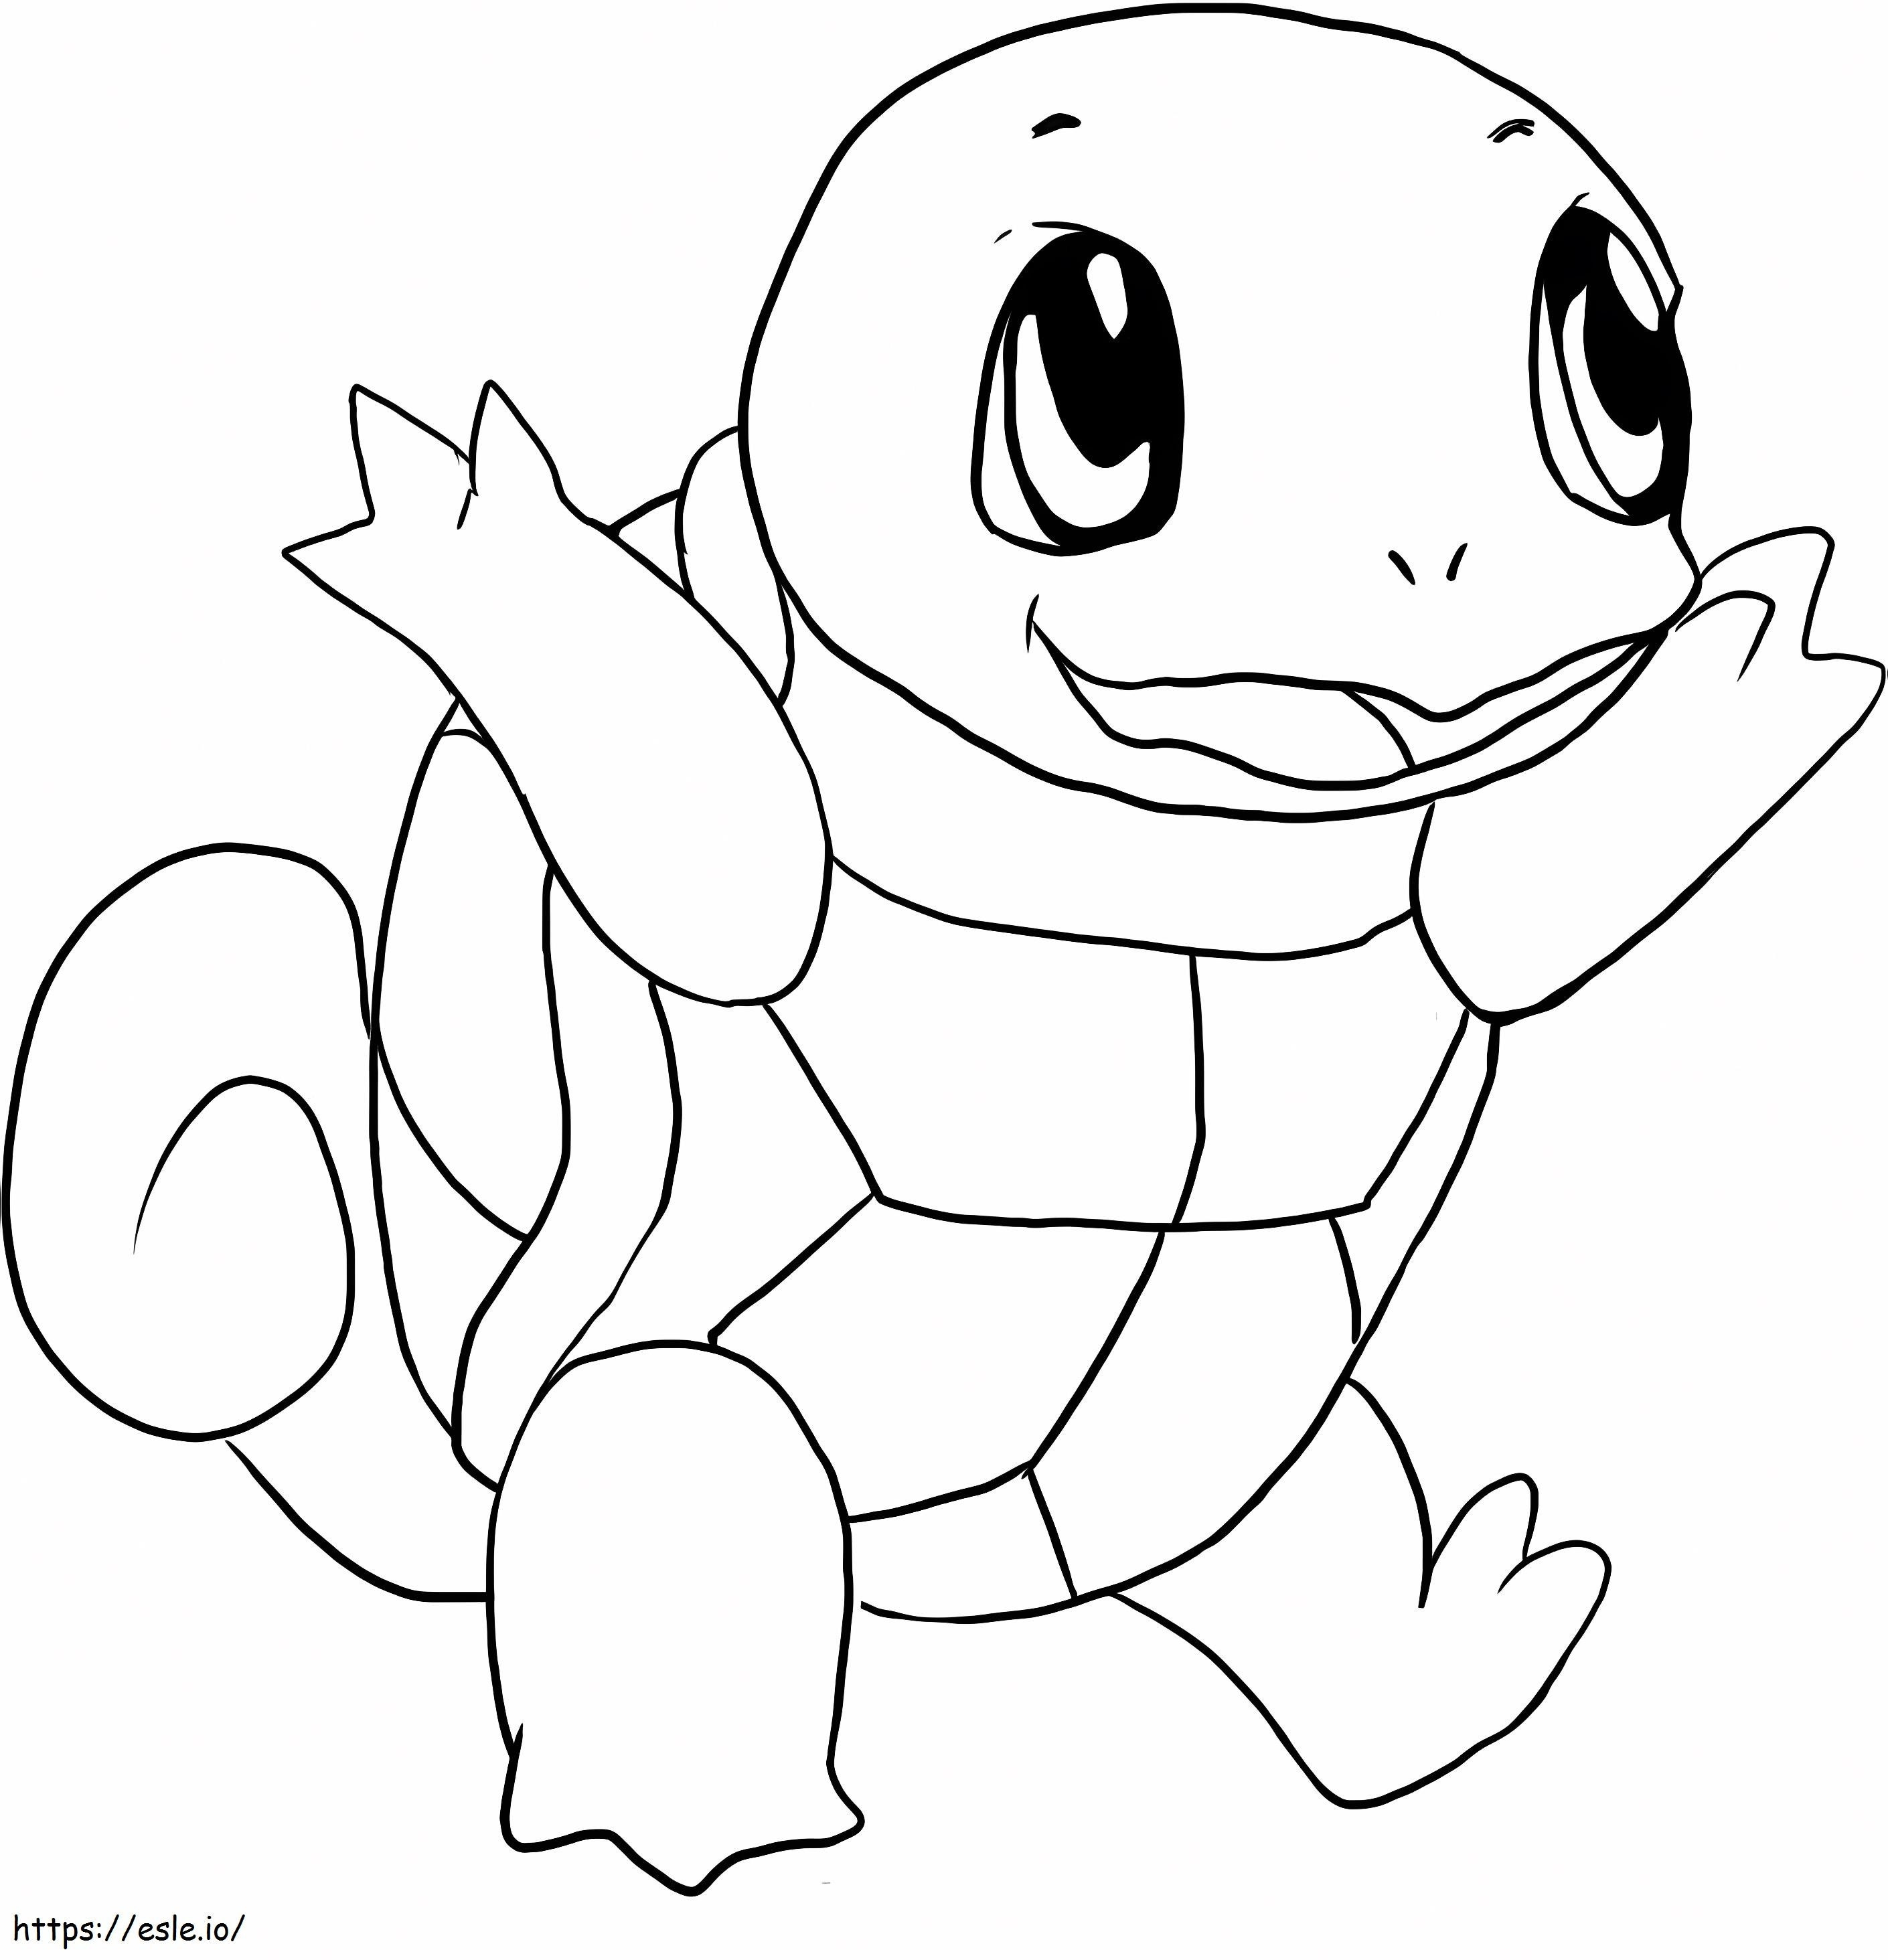 99 coloring page